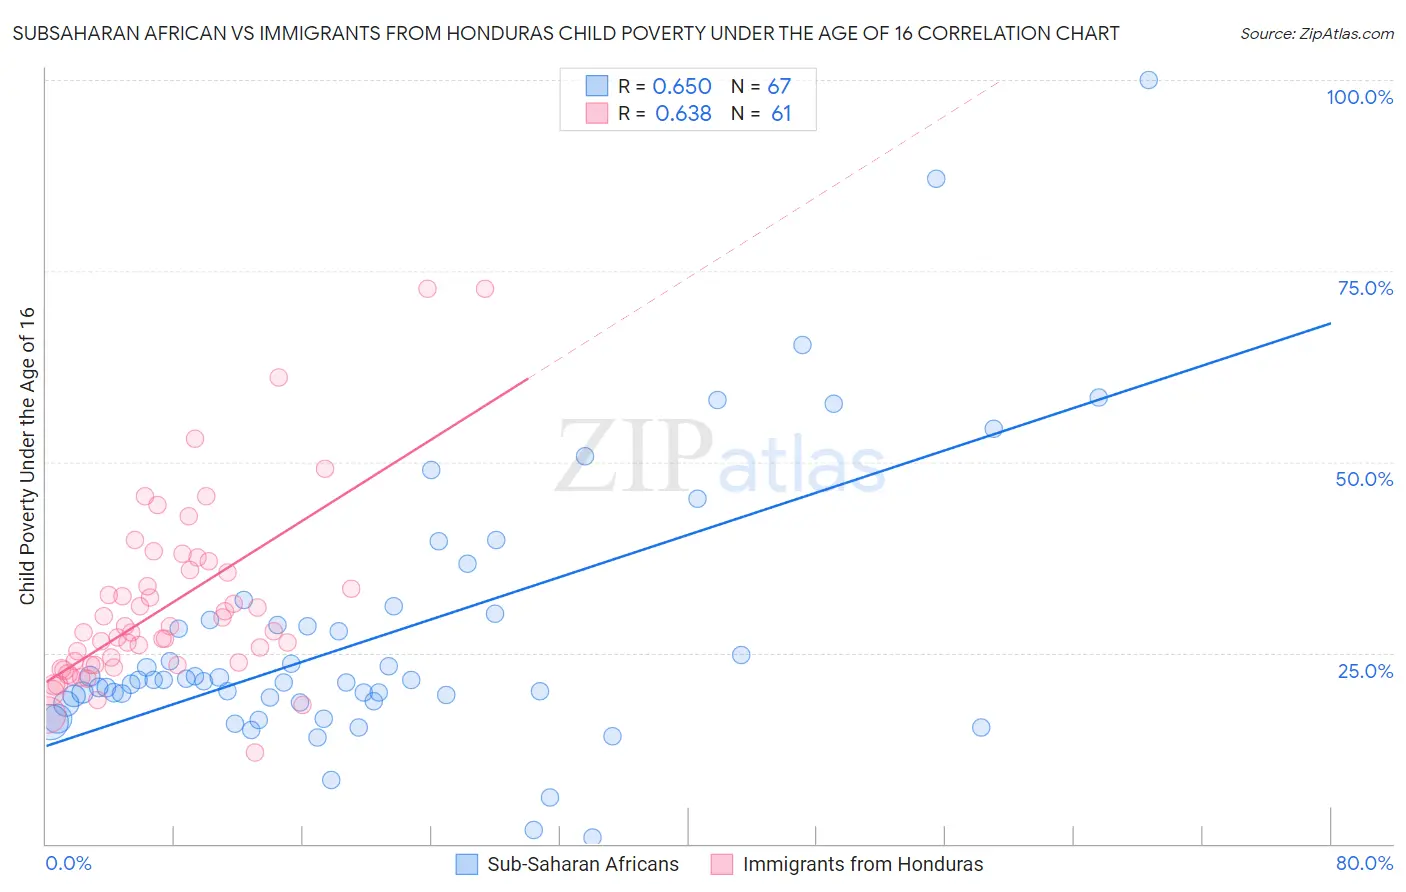 Subsaharan African vs Immigrants from Honduras Child Poverty Under the Age of 16